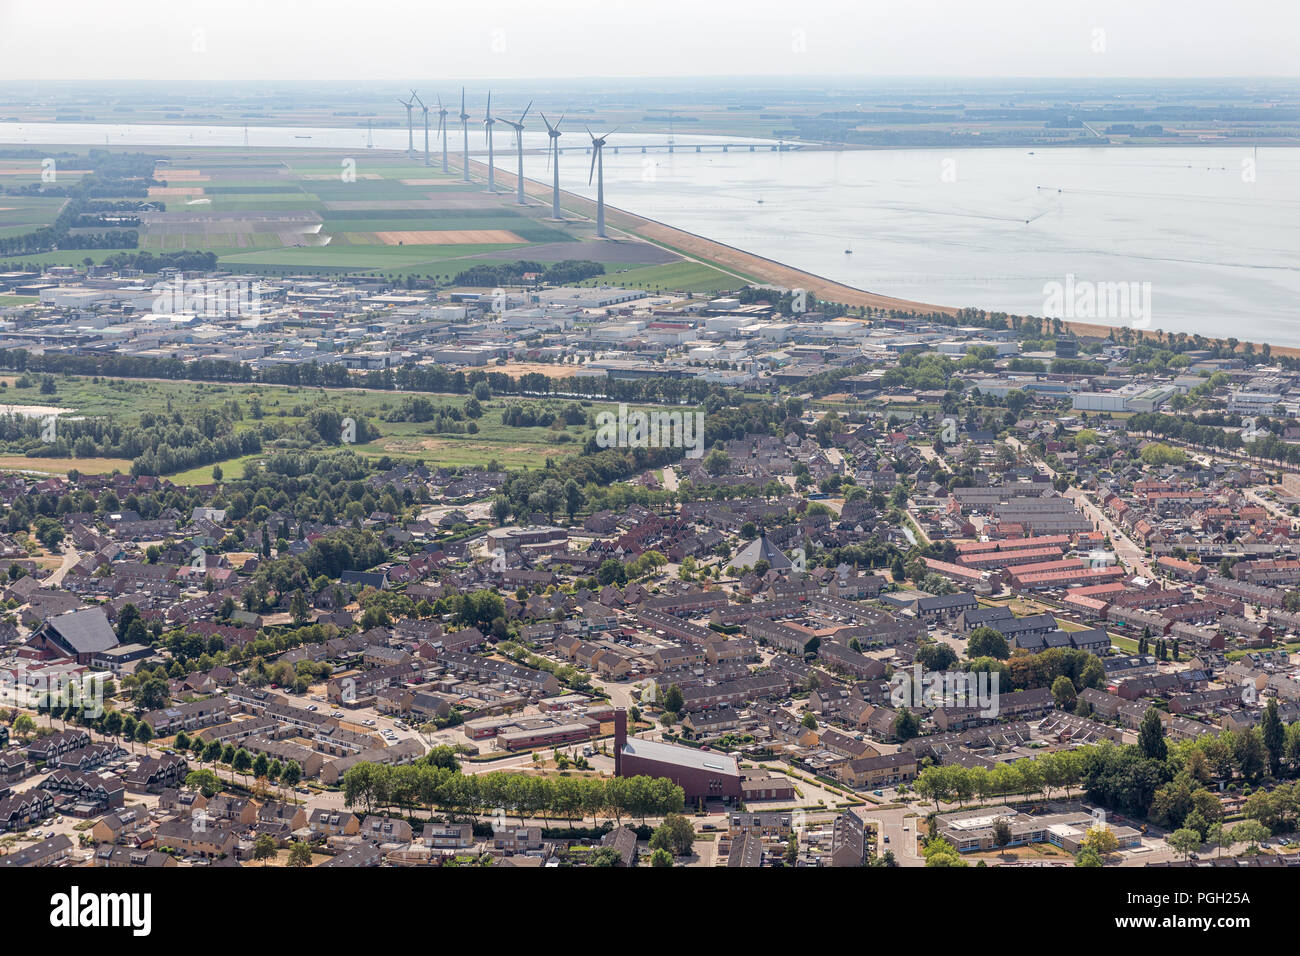 Aerial view Dutch fishing village with residential area and windturbines Stock Photo